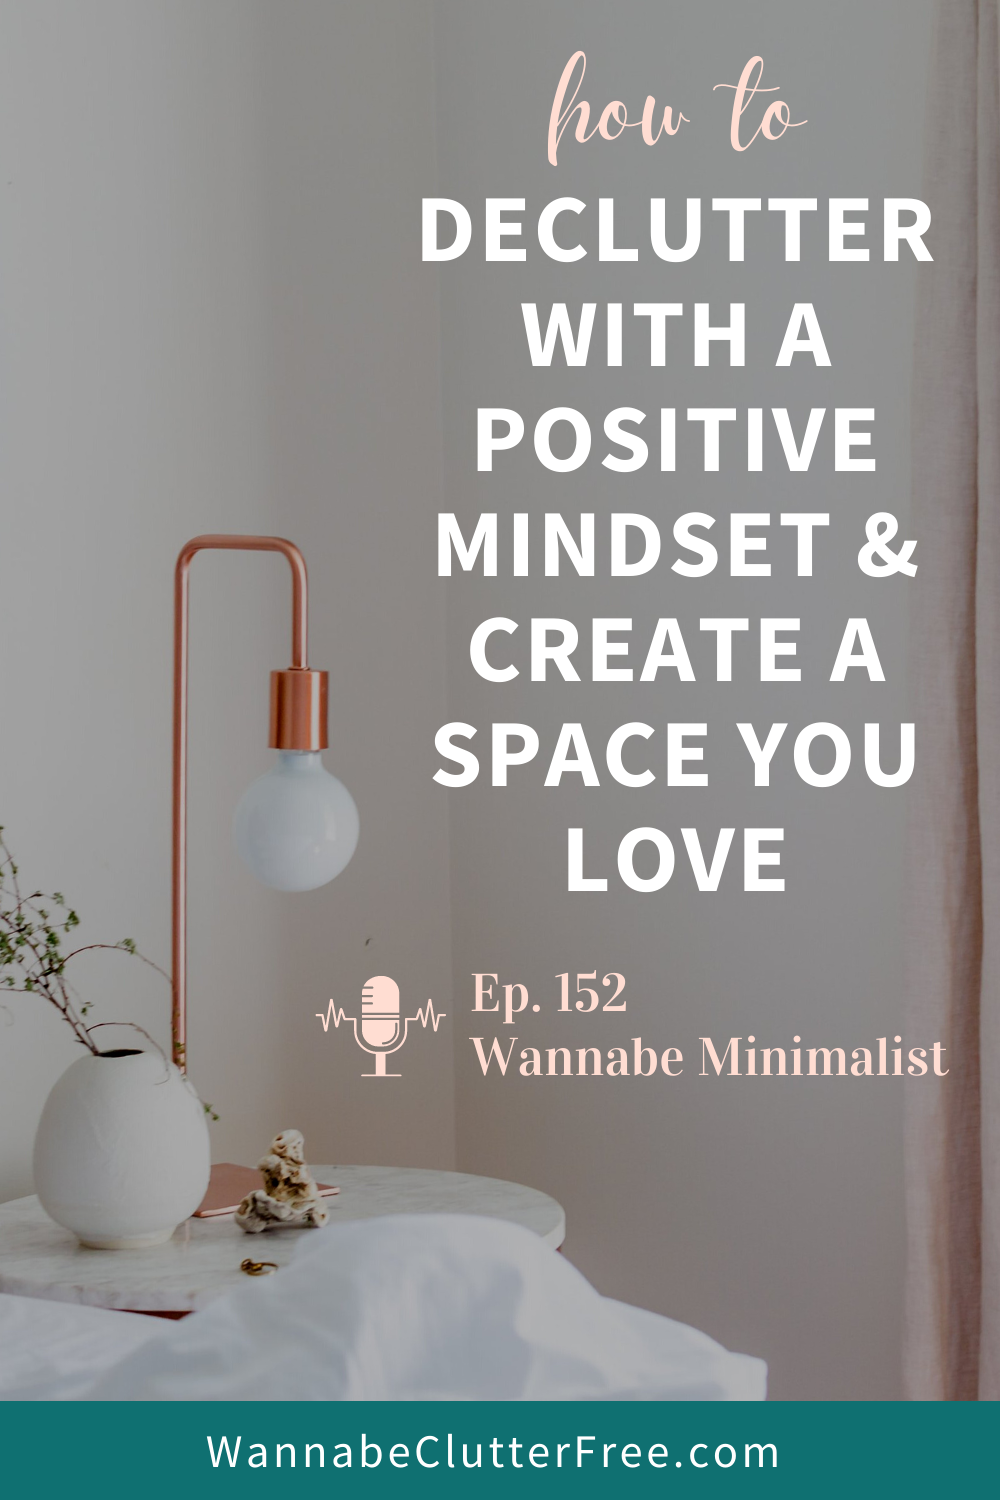 How to Declutter with a Positive Mindset